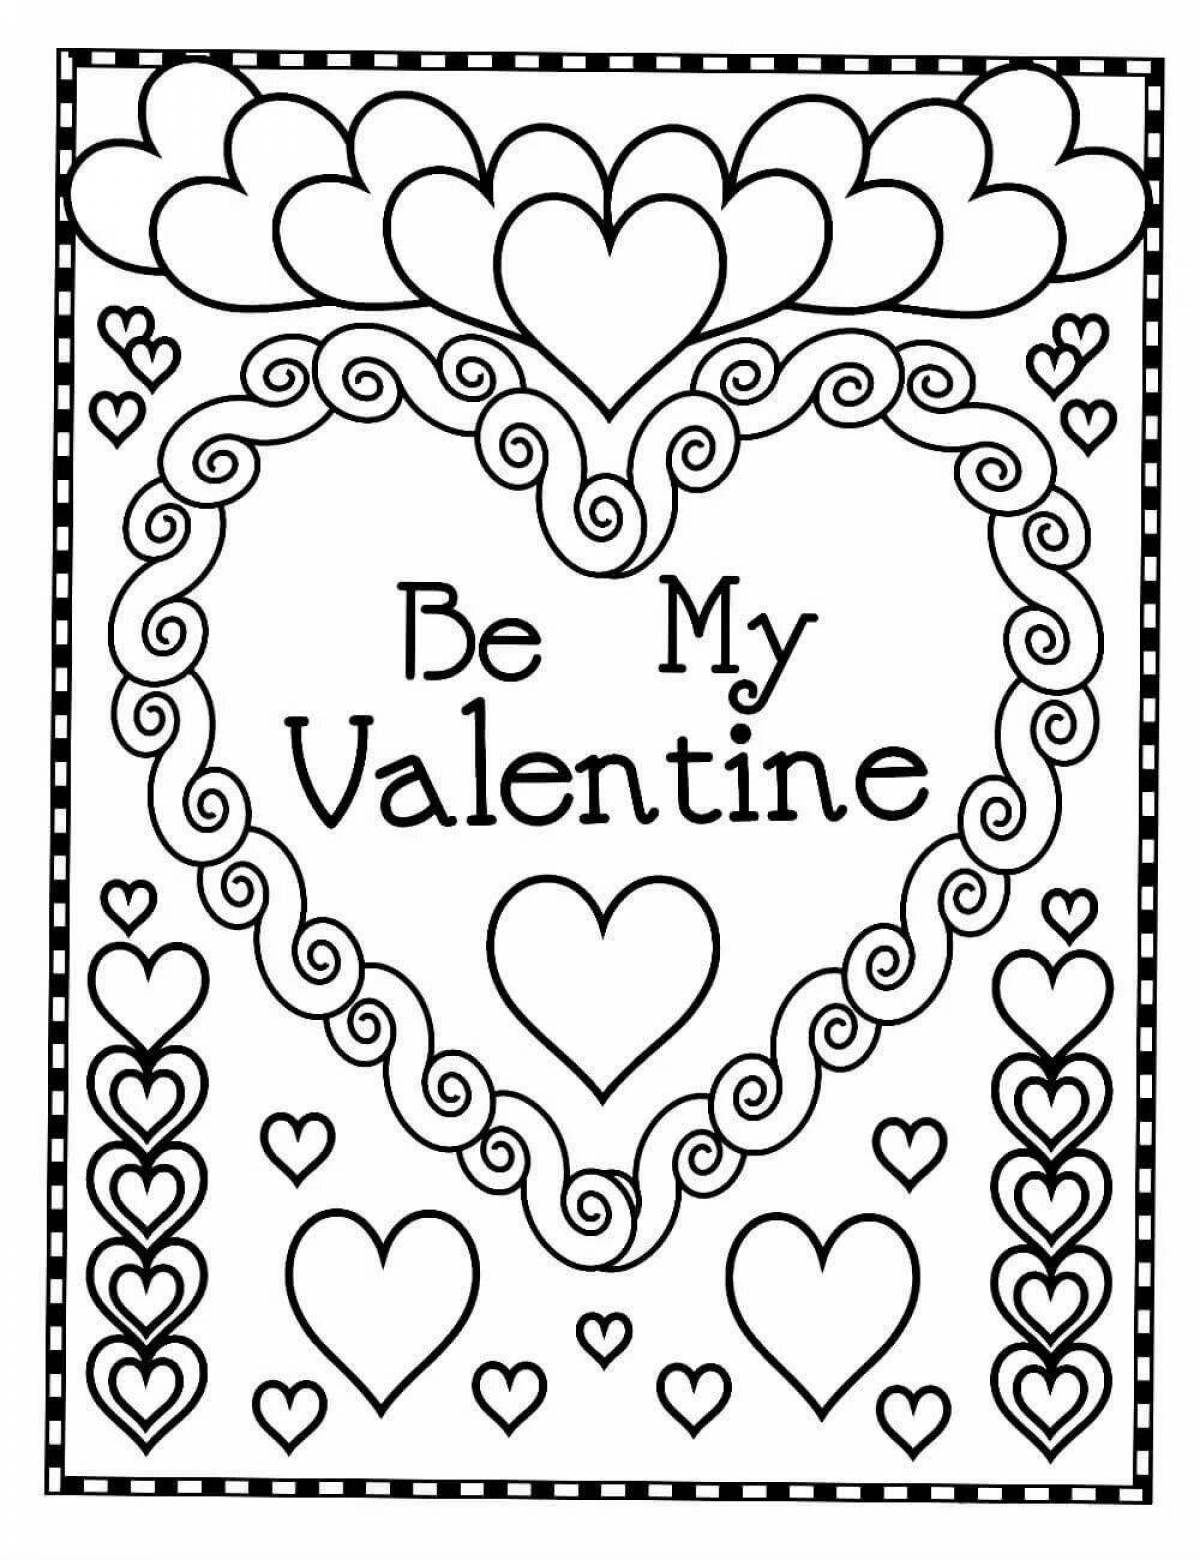 Great valentine coloring book for kids